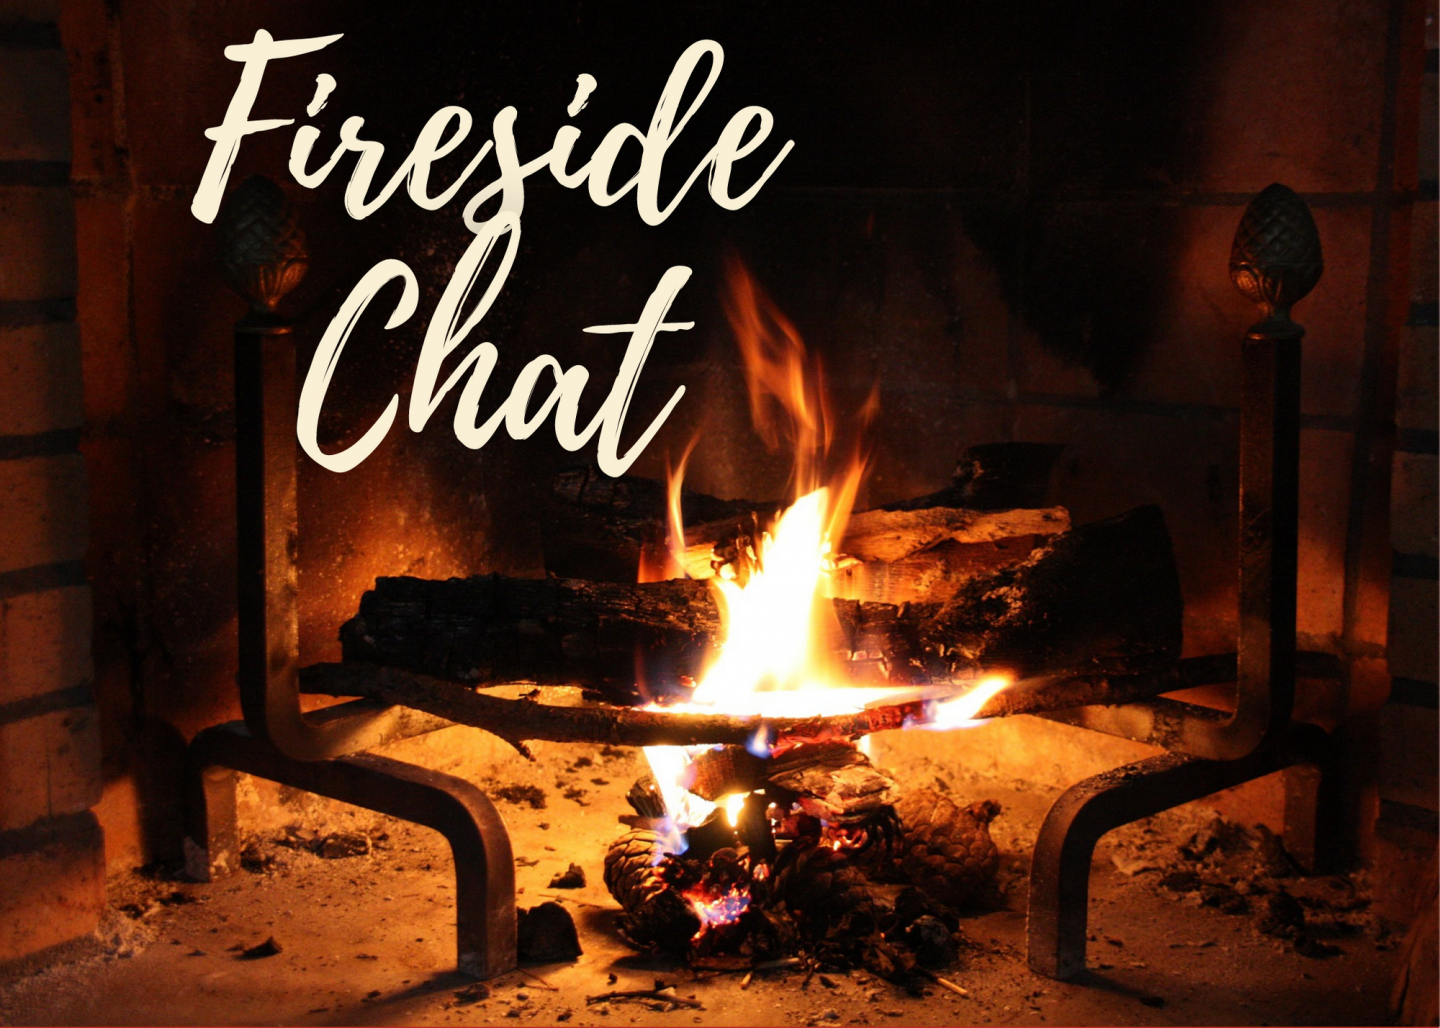 According to fireside chat #19